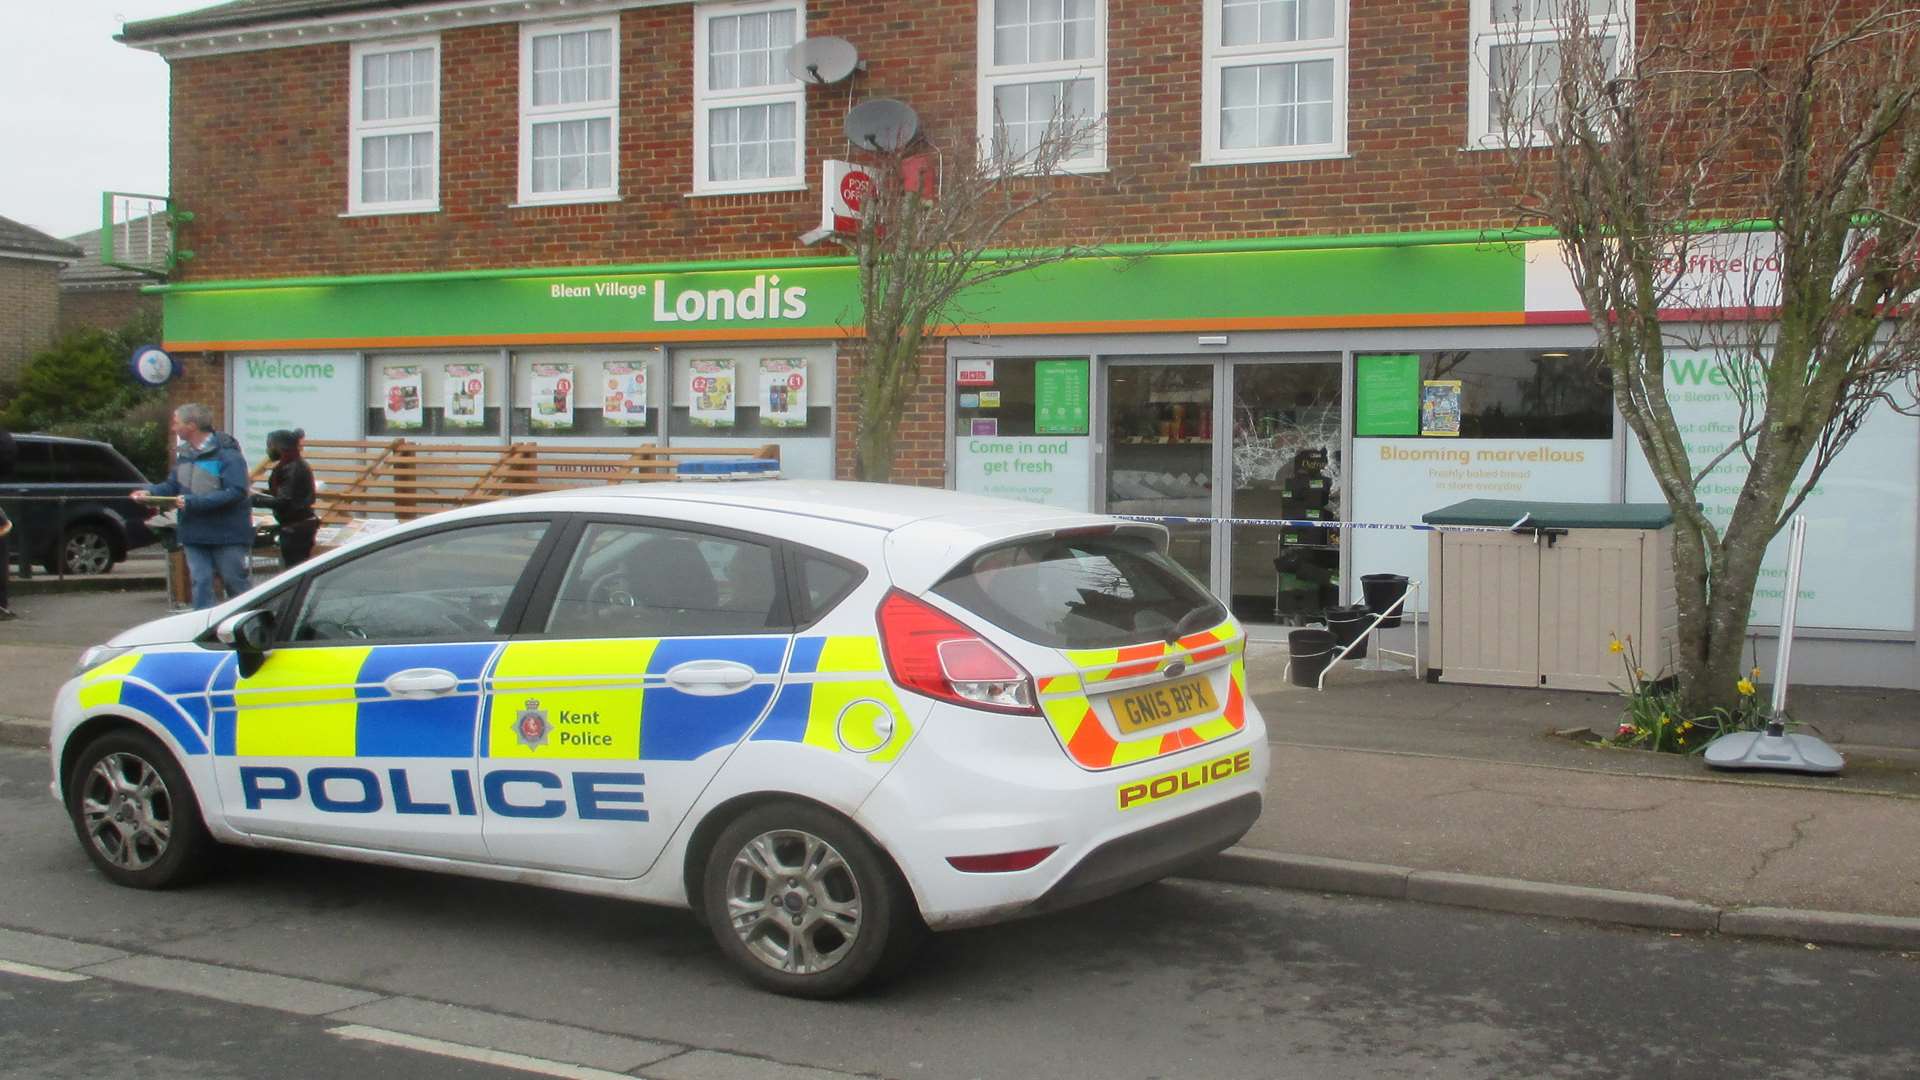 The Londis shop in Blean was raided earlier today.